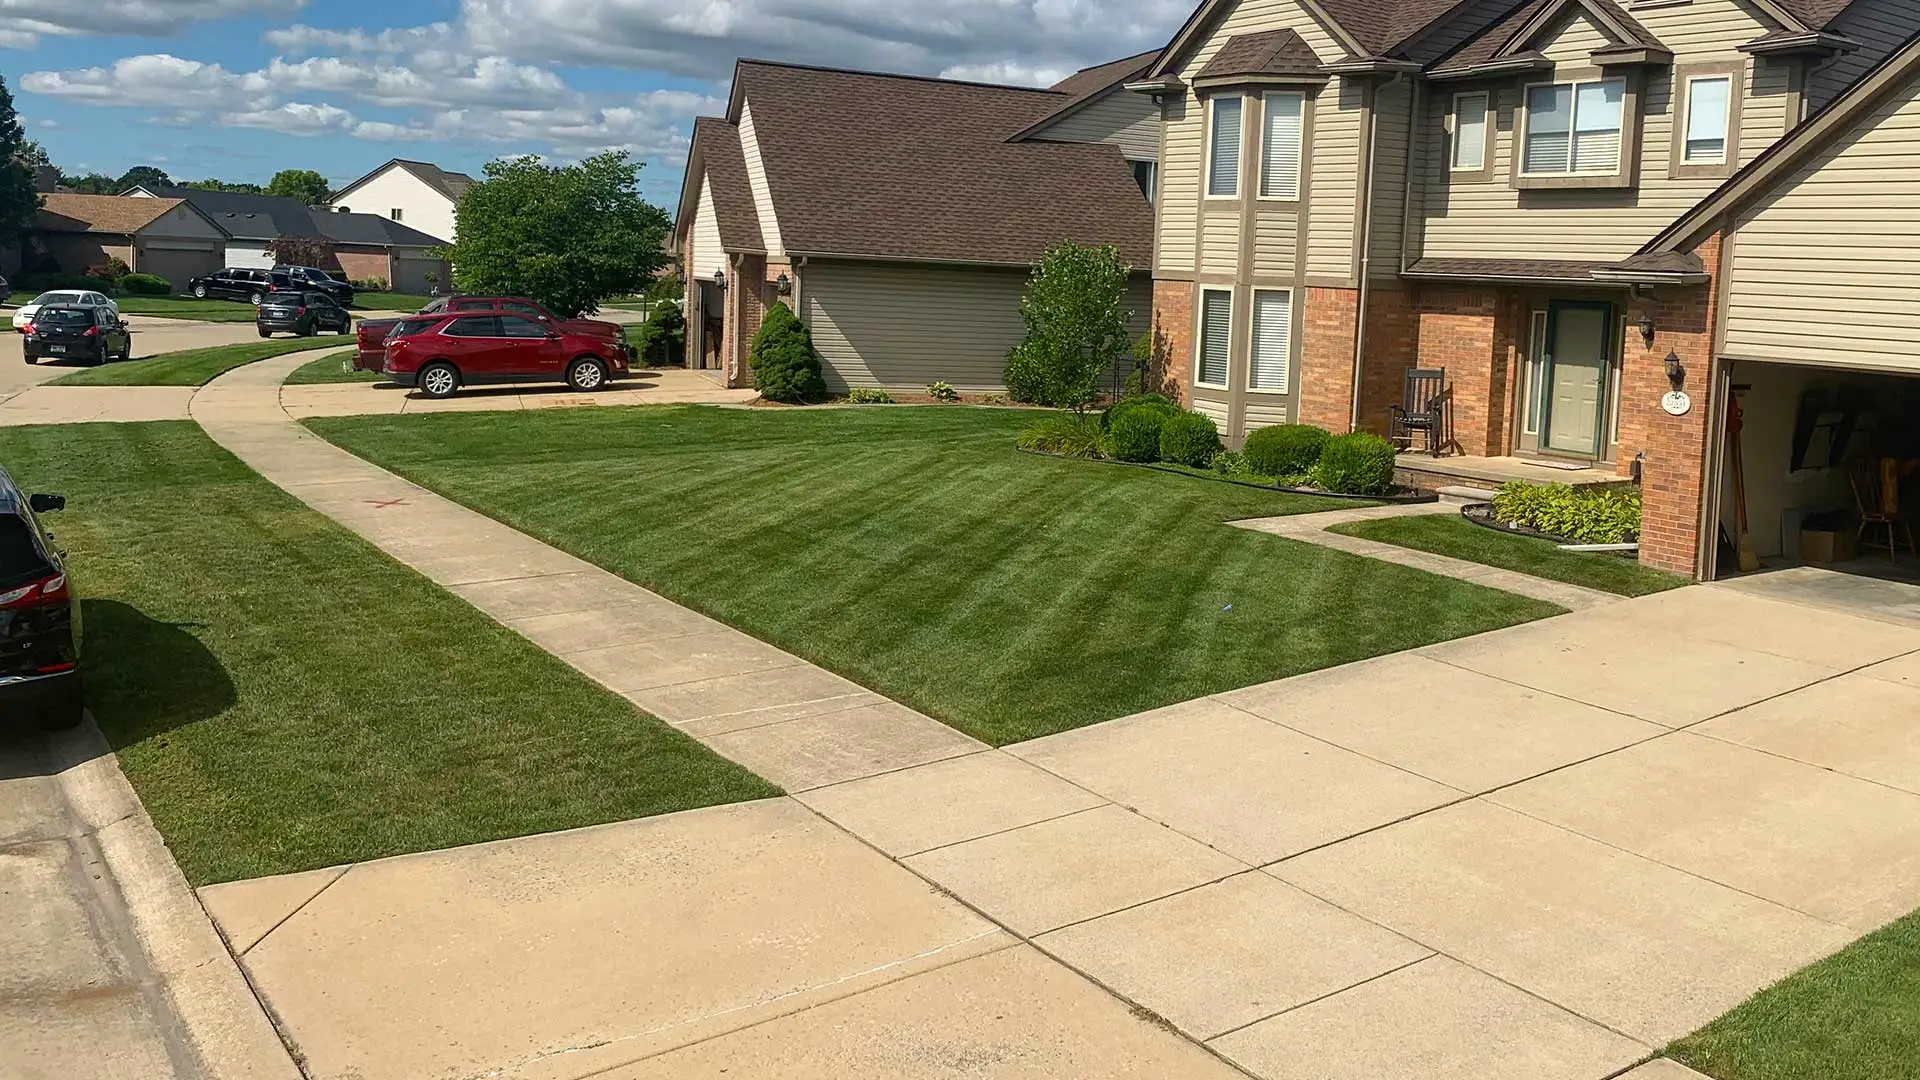 A Shelby, MI home with mowing lines in the front yard.